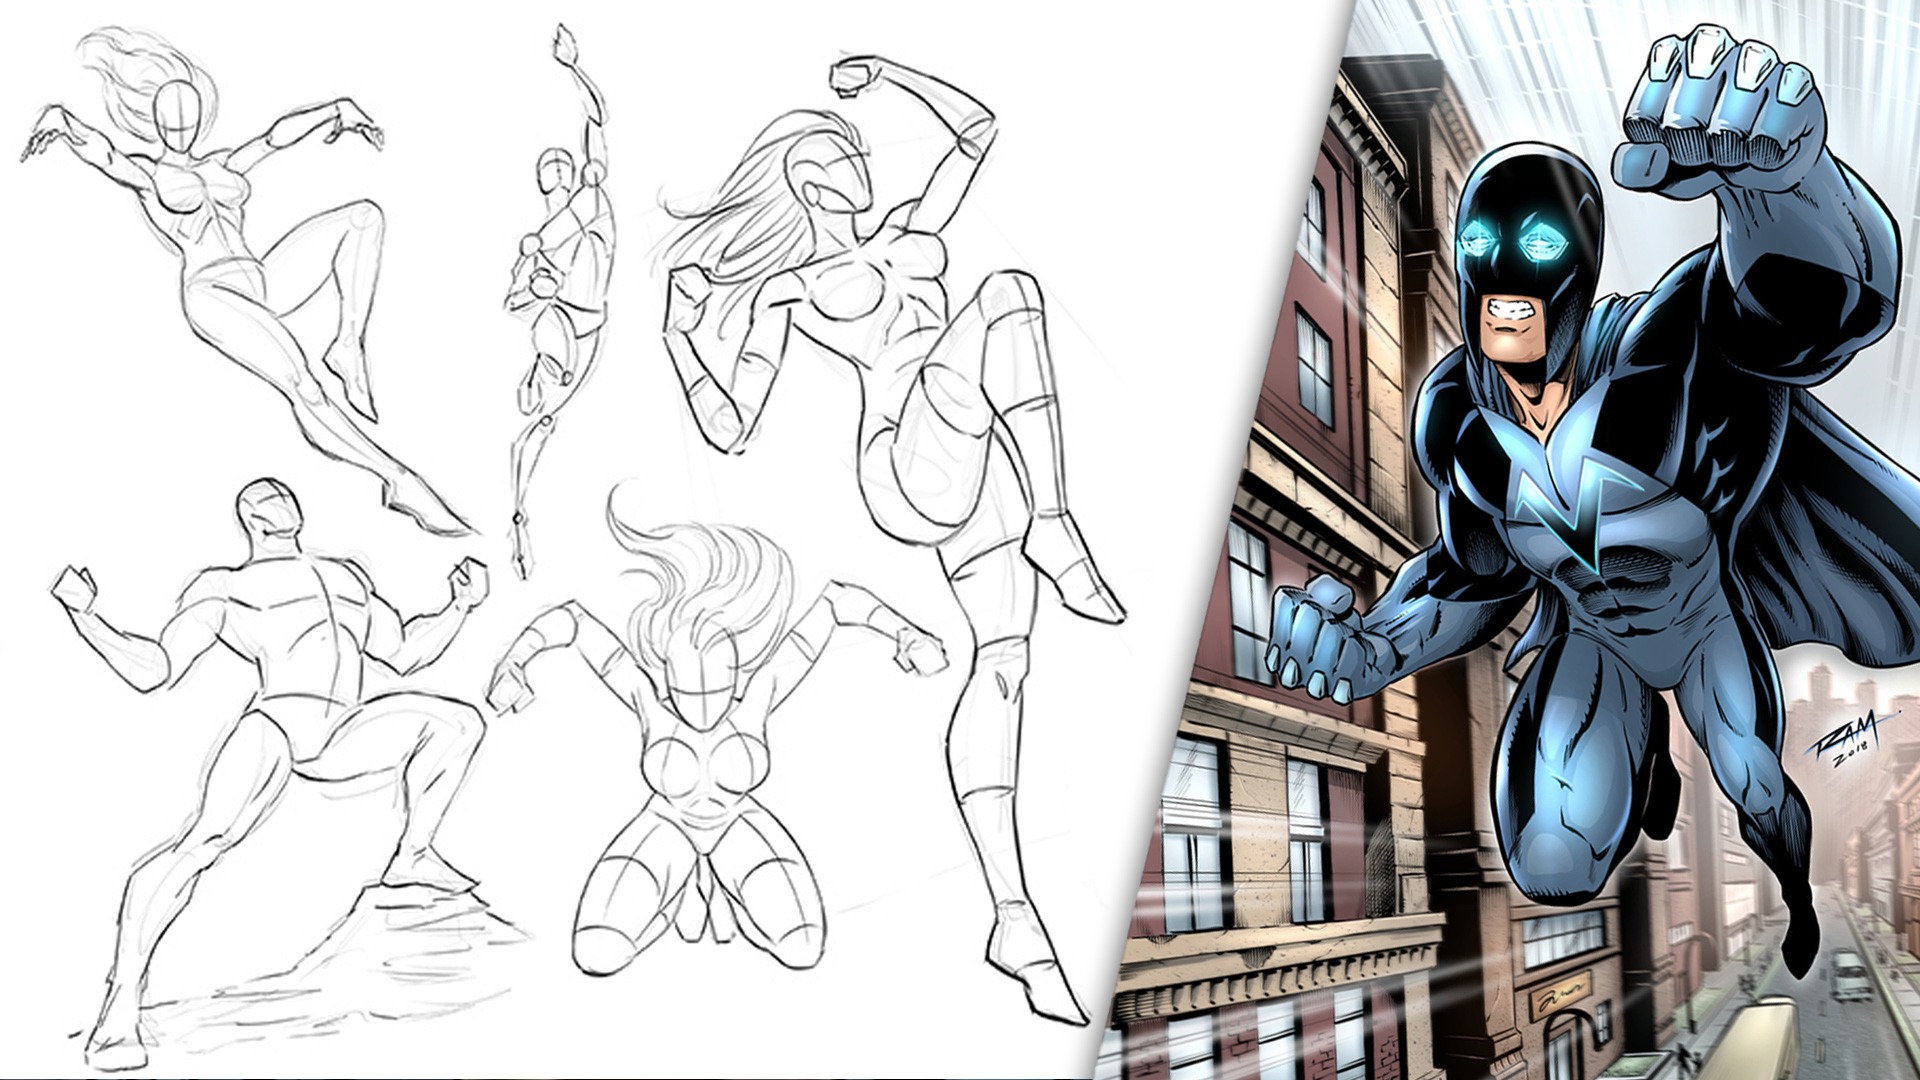 Superhero fight poses | Drawing poses, Art reference poses, Art reference